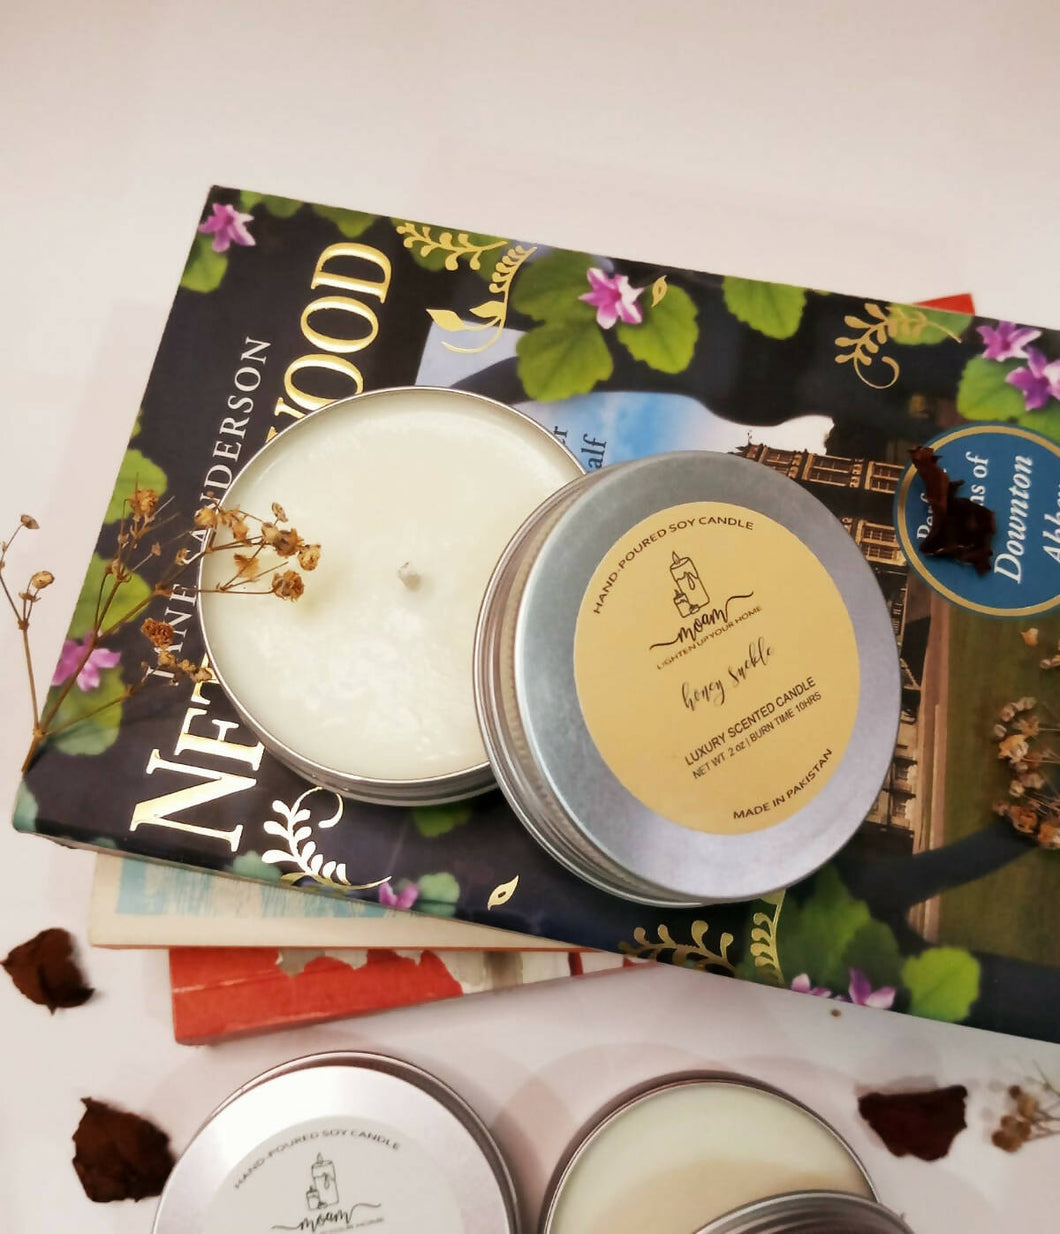 Honey Suckle Travel Tin Soy Candle